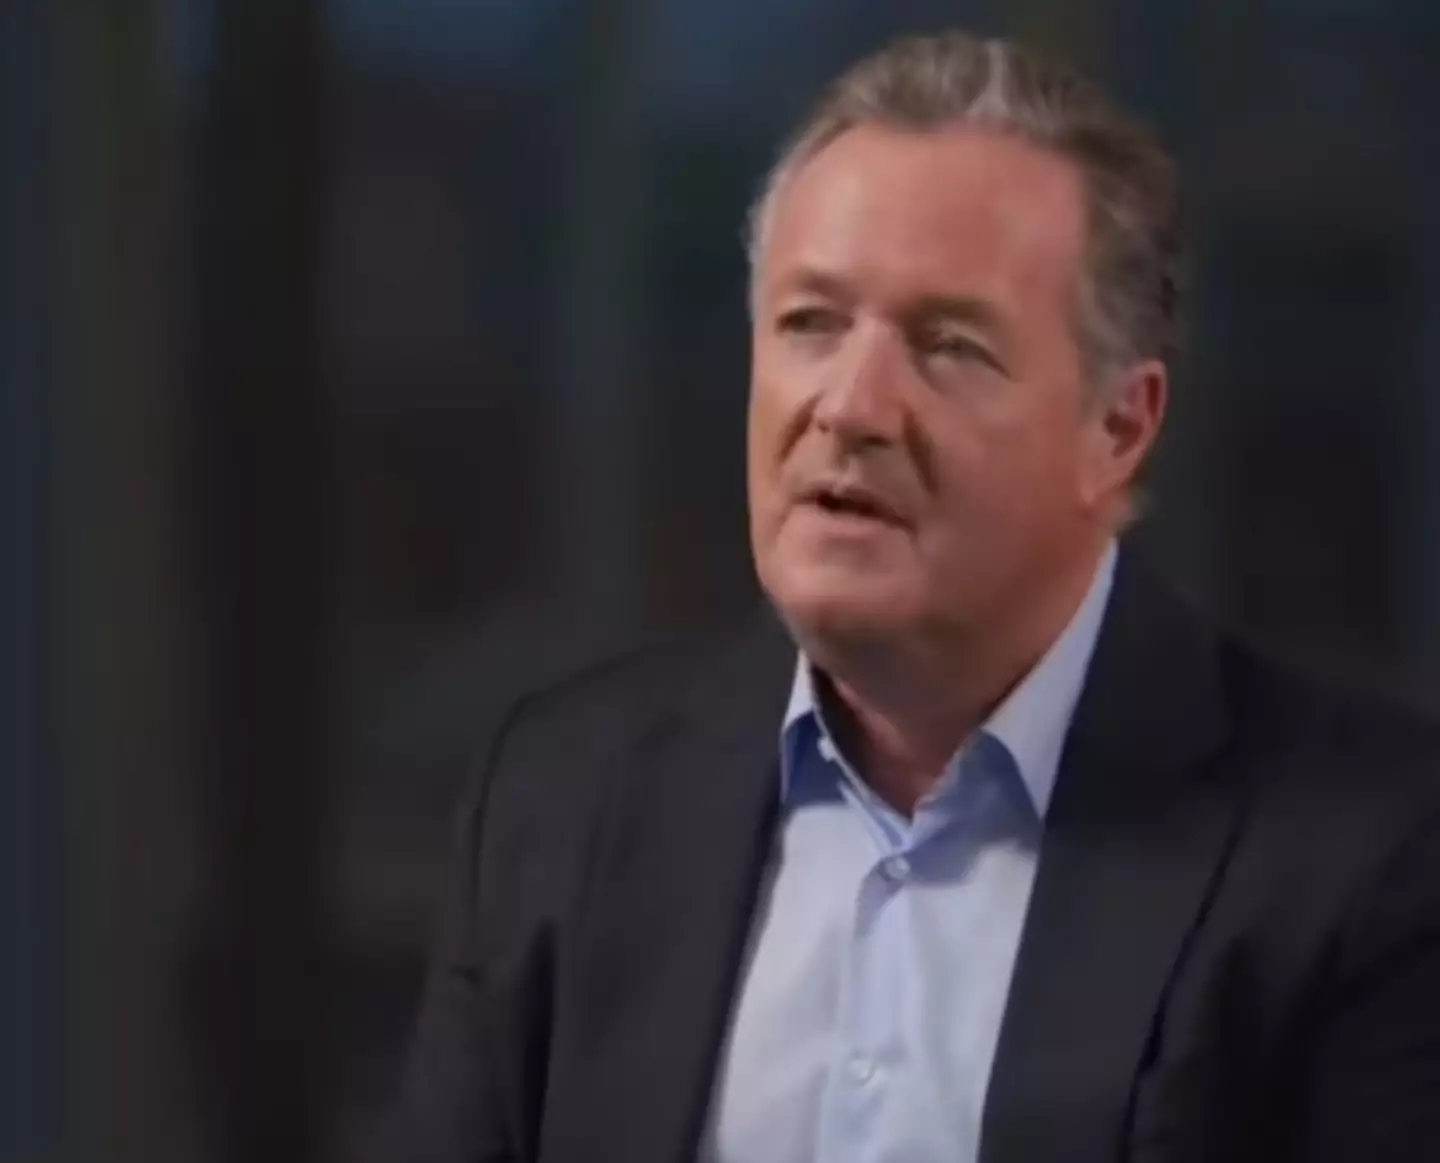 Piers Morgan is interviewing serial killers across America for The Killer Interview with Piers Morgan.